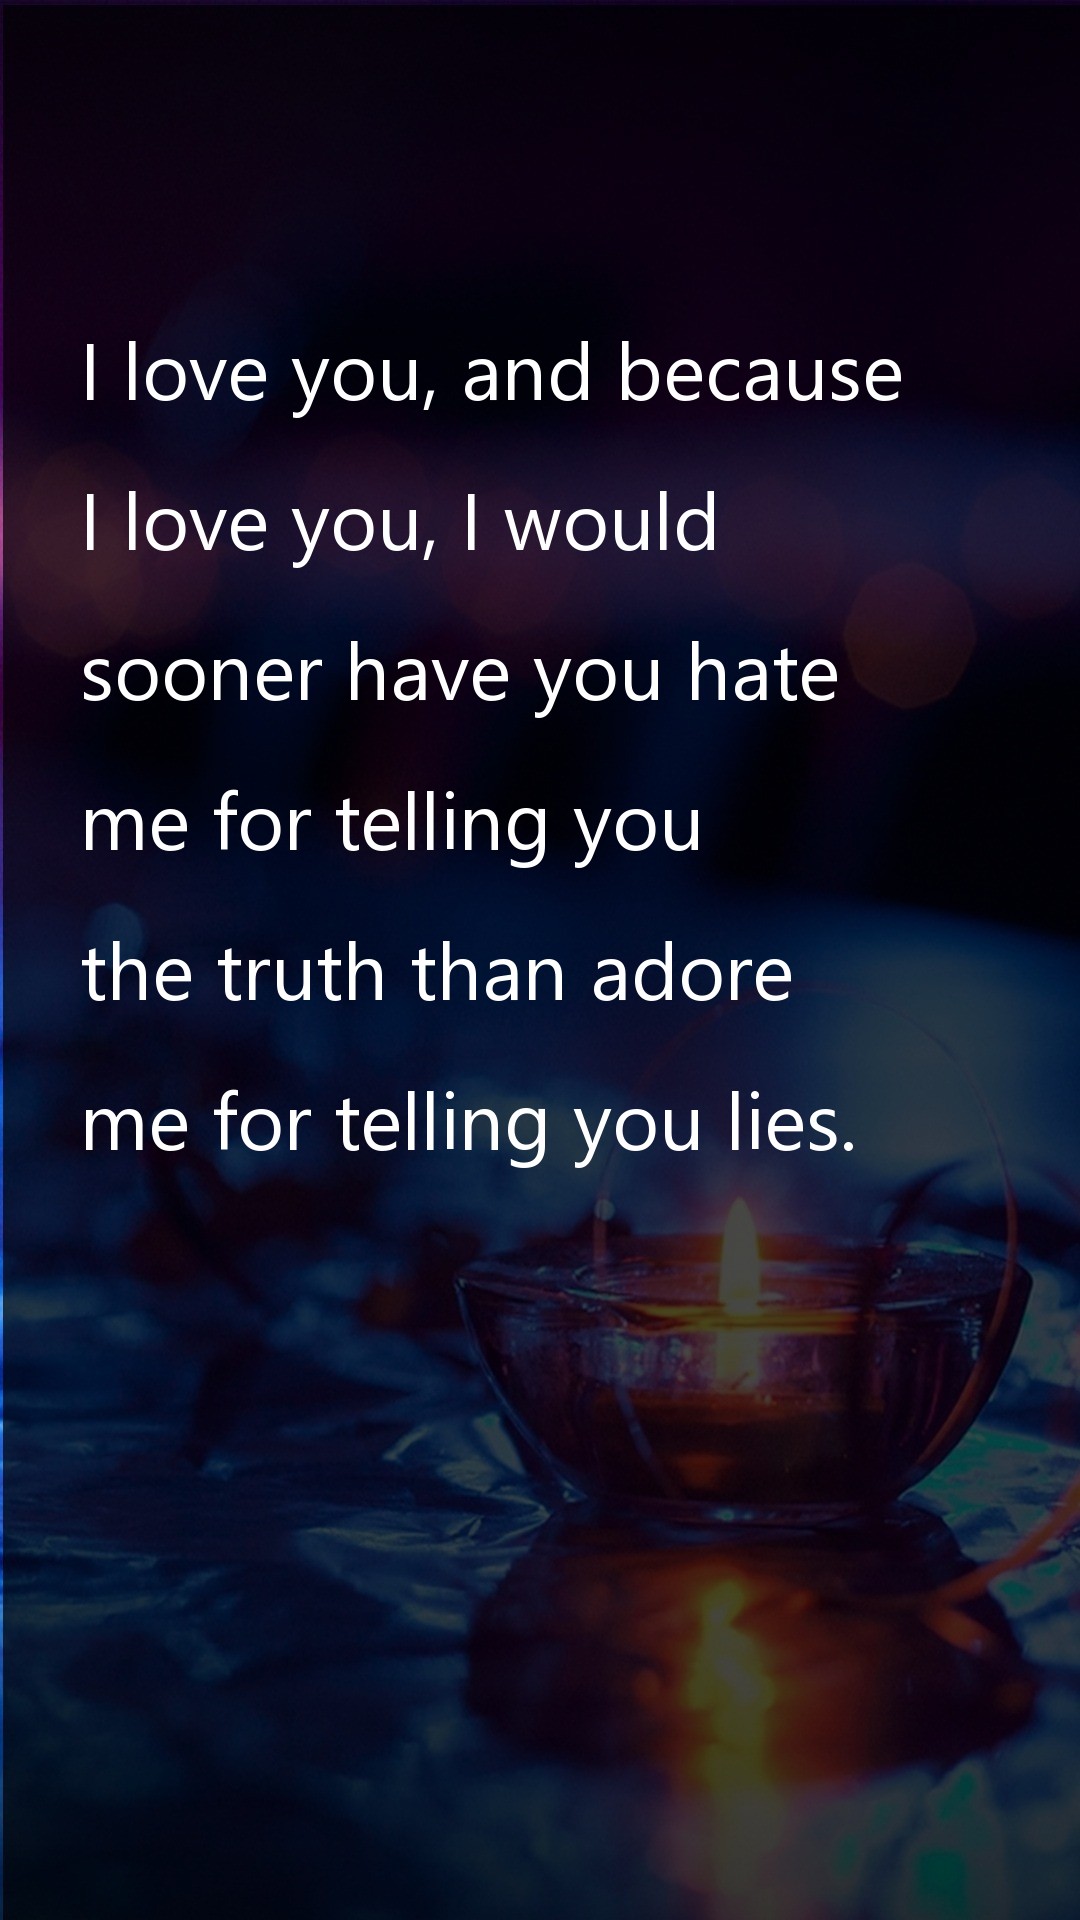 I love you and because - Truth Quotes at statush.com